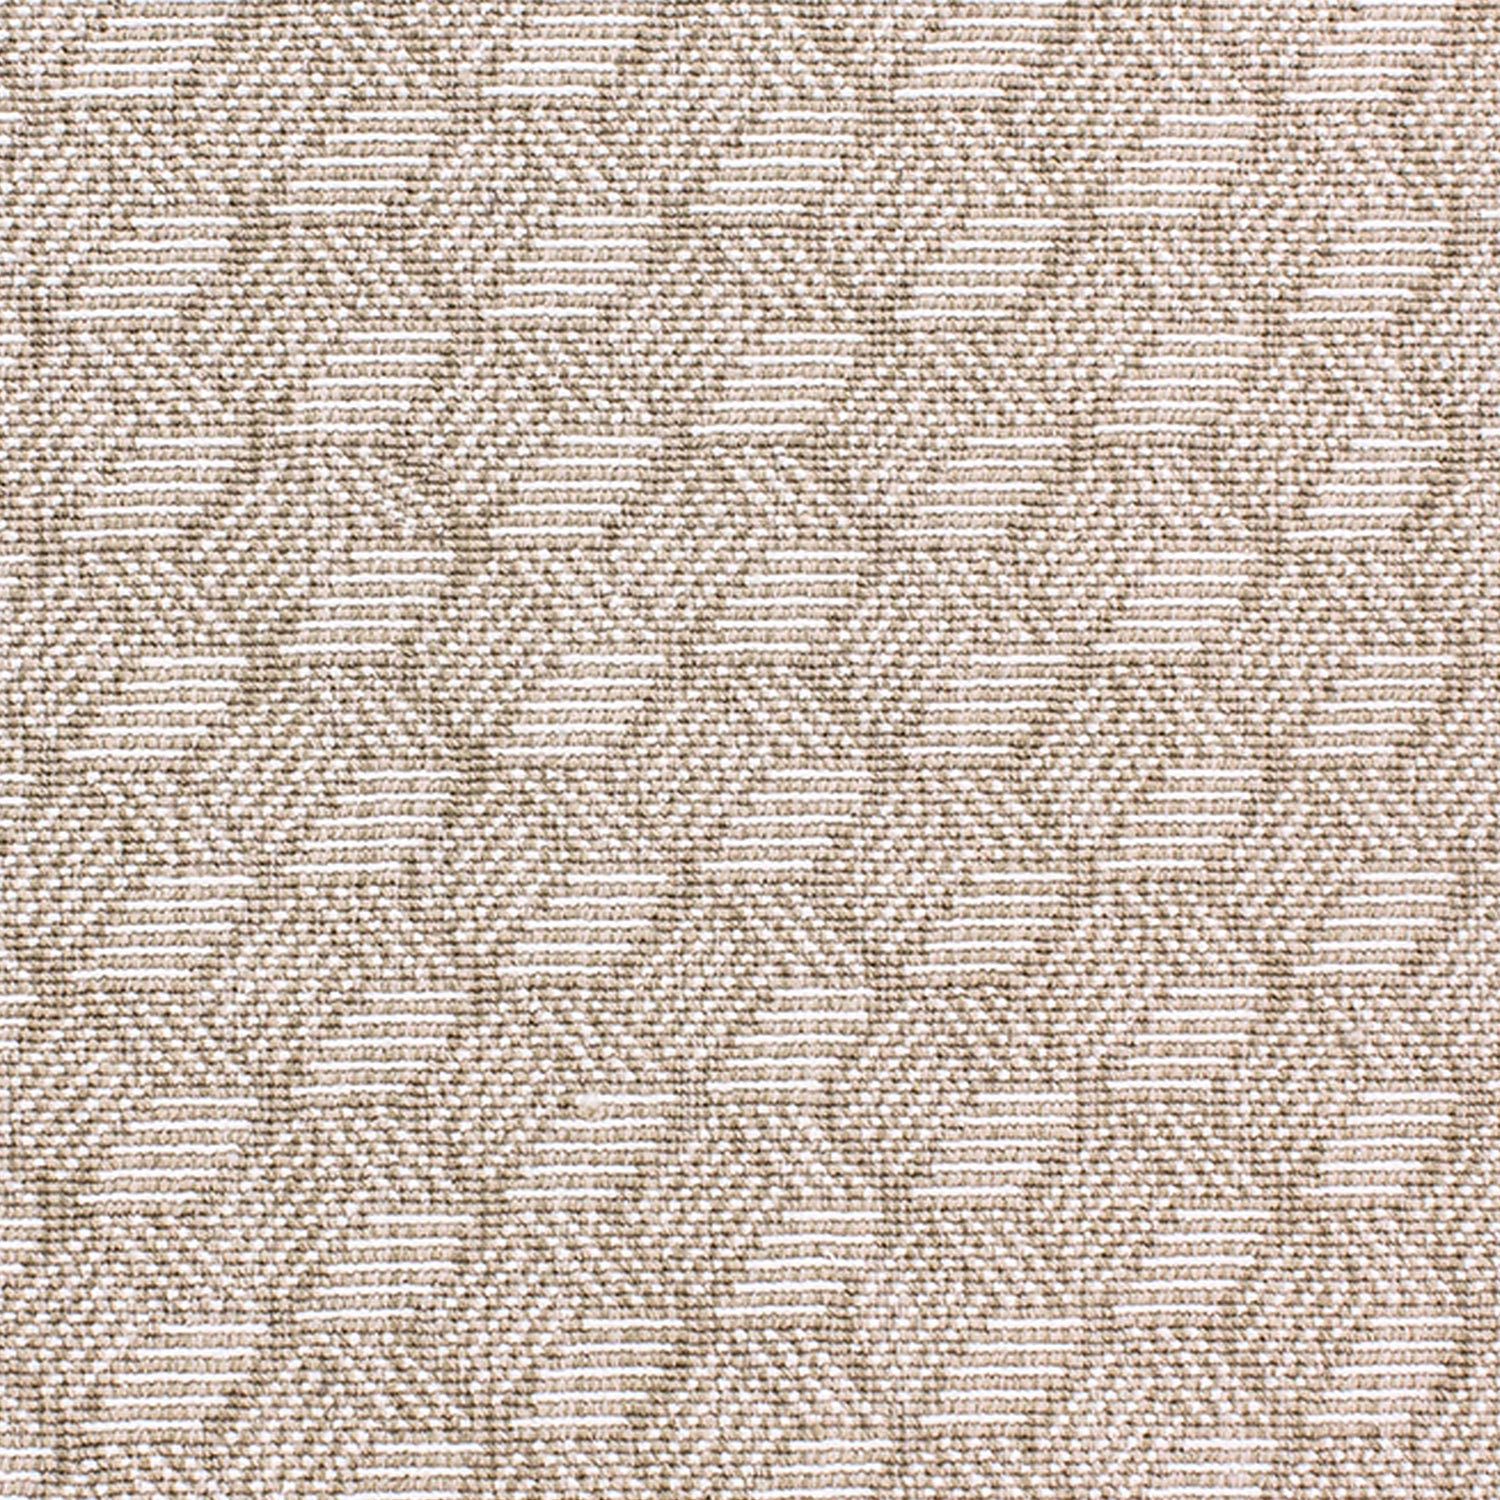 Wool-blend broadloom carpet swatch in a small-scale linear geometric pattern in white and light brown.